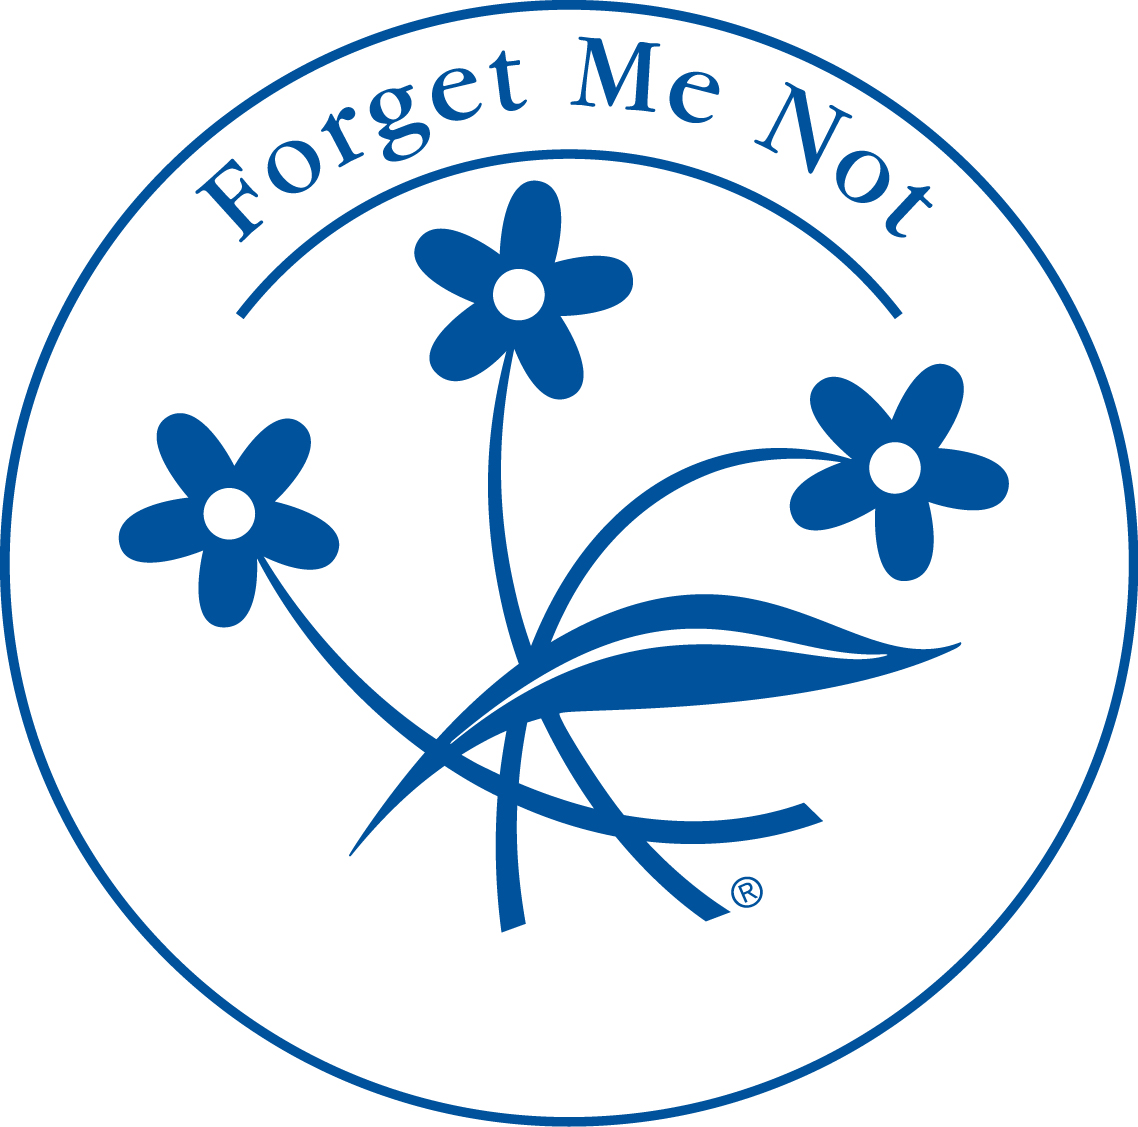 Forget Me Not symbol